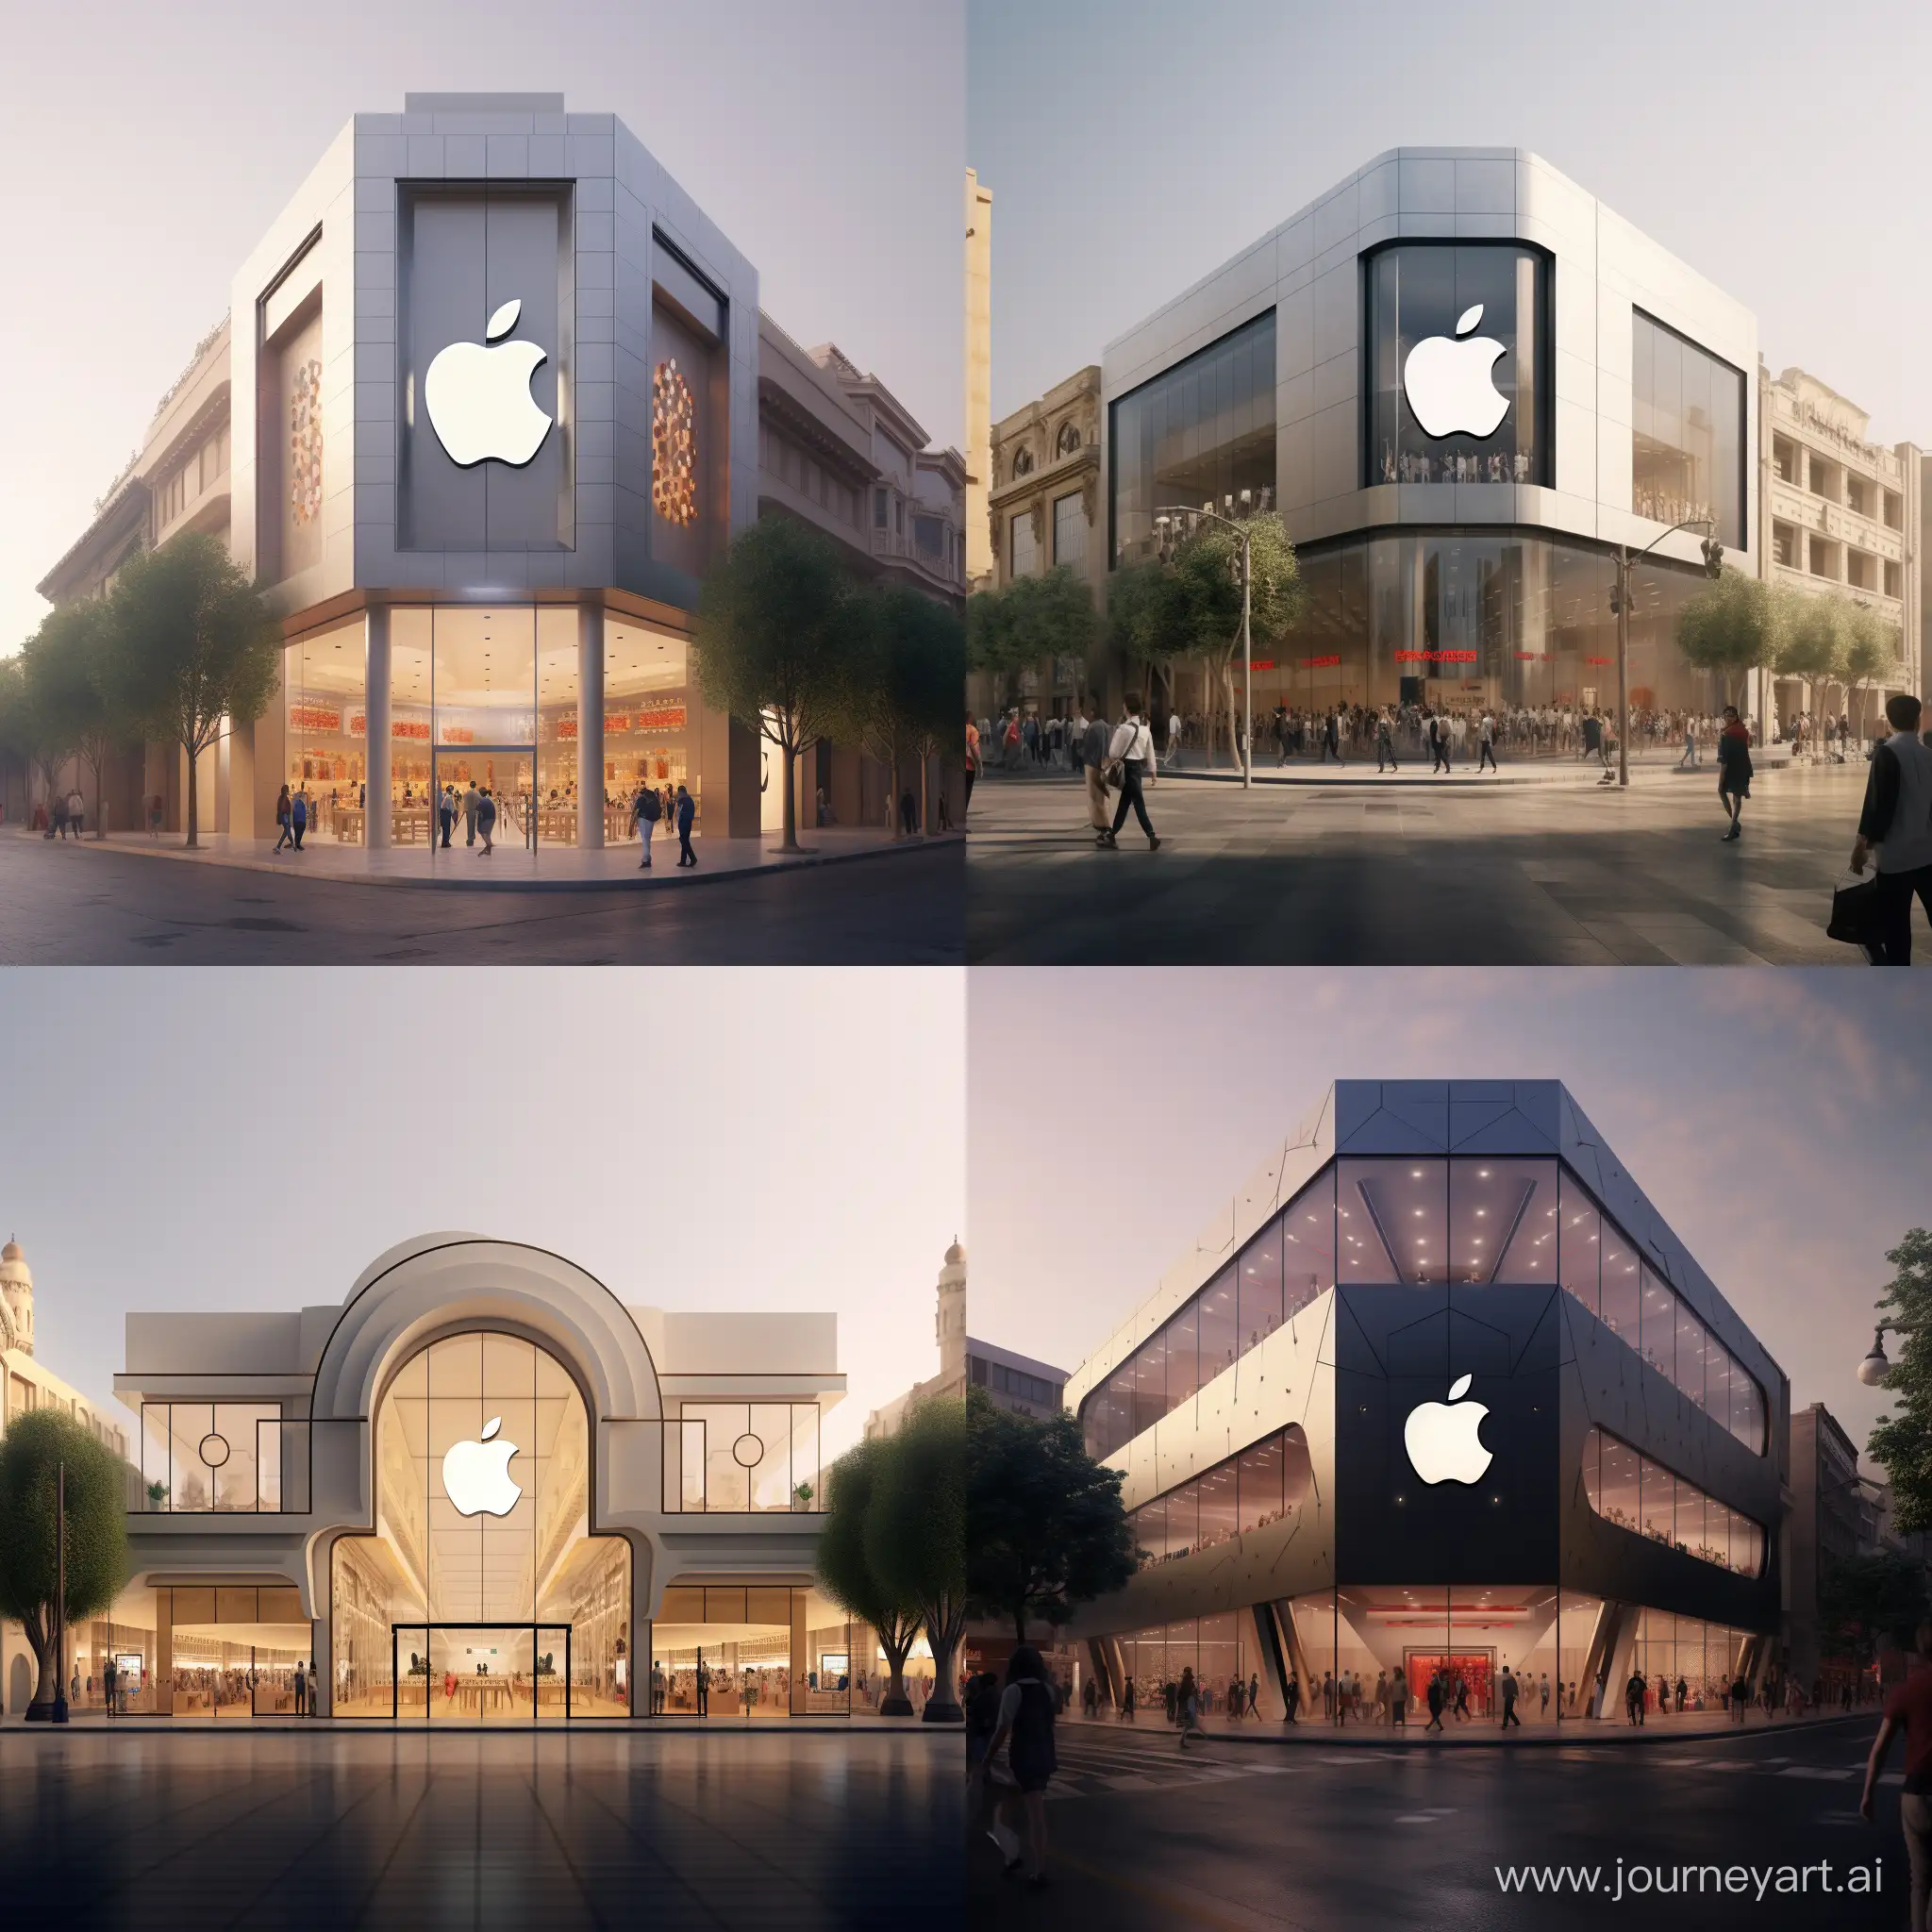 Create an minimalist 4K, realistic image of an apple store designed in the style of a chinesse shop, situated in the middle of a crowded street in Cairo, Egypt